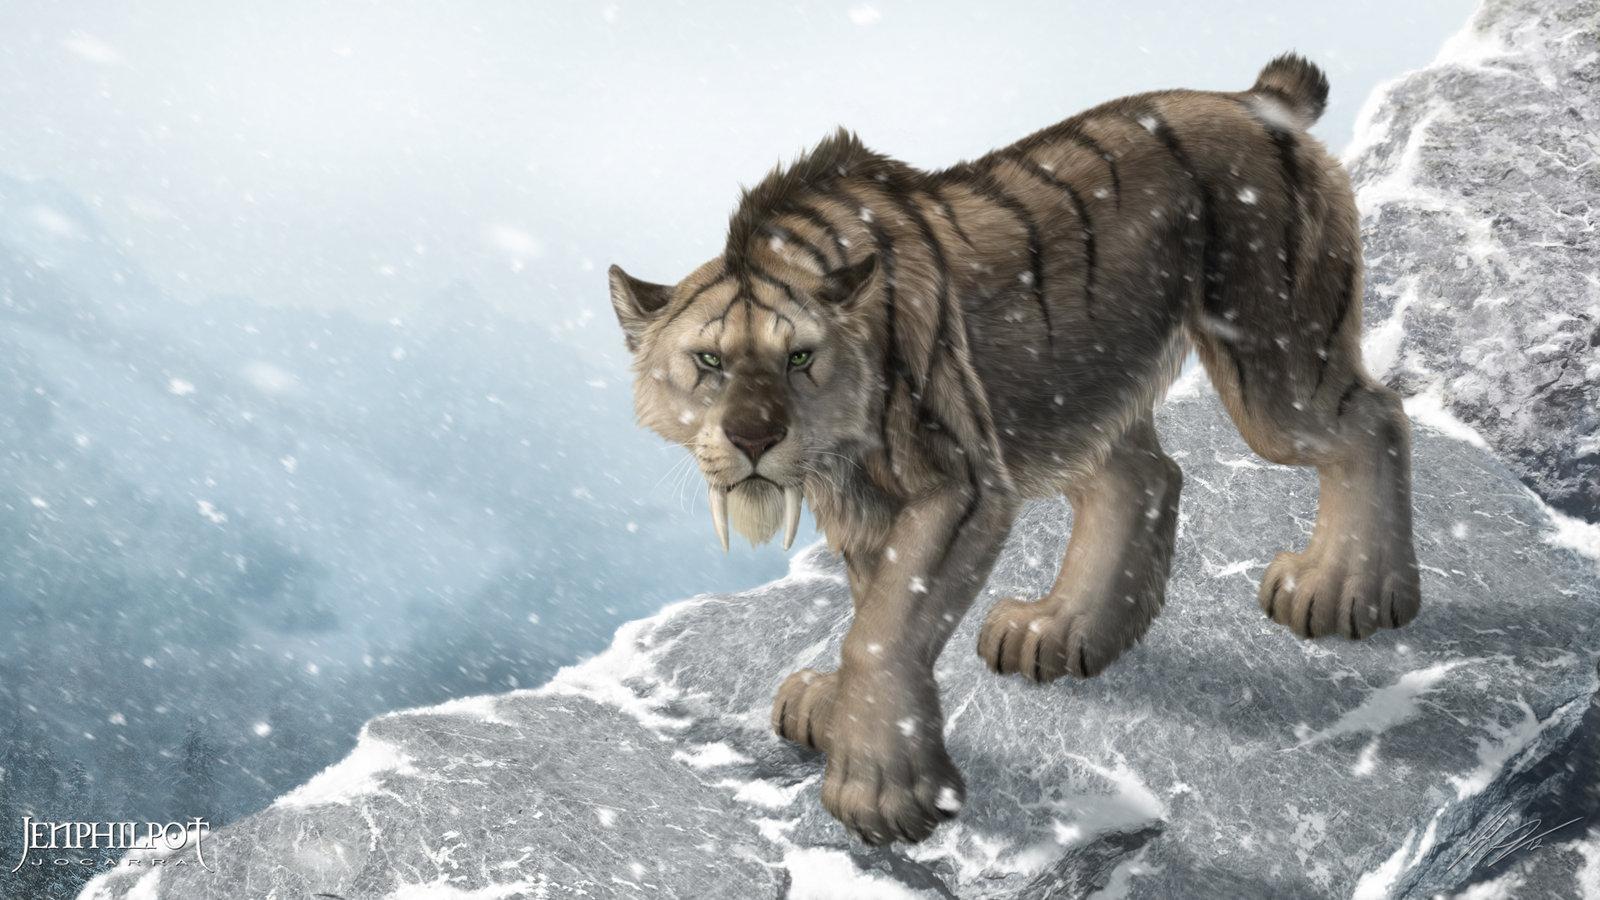 Saber Tooth Tiger Wallpaper Group , Download for free